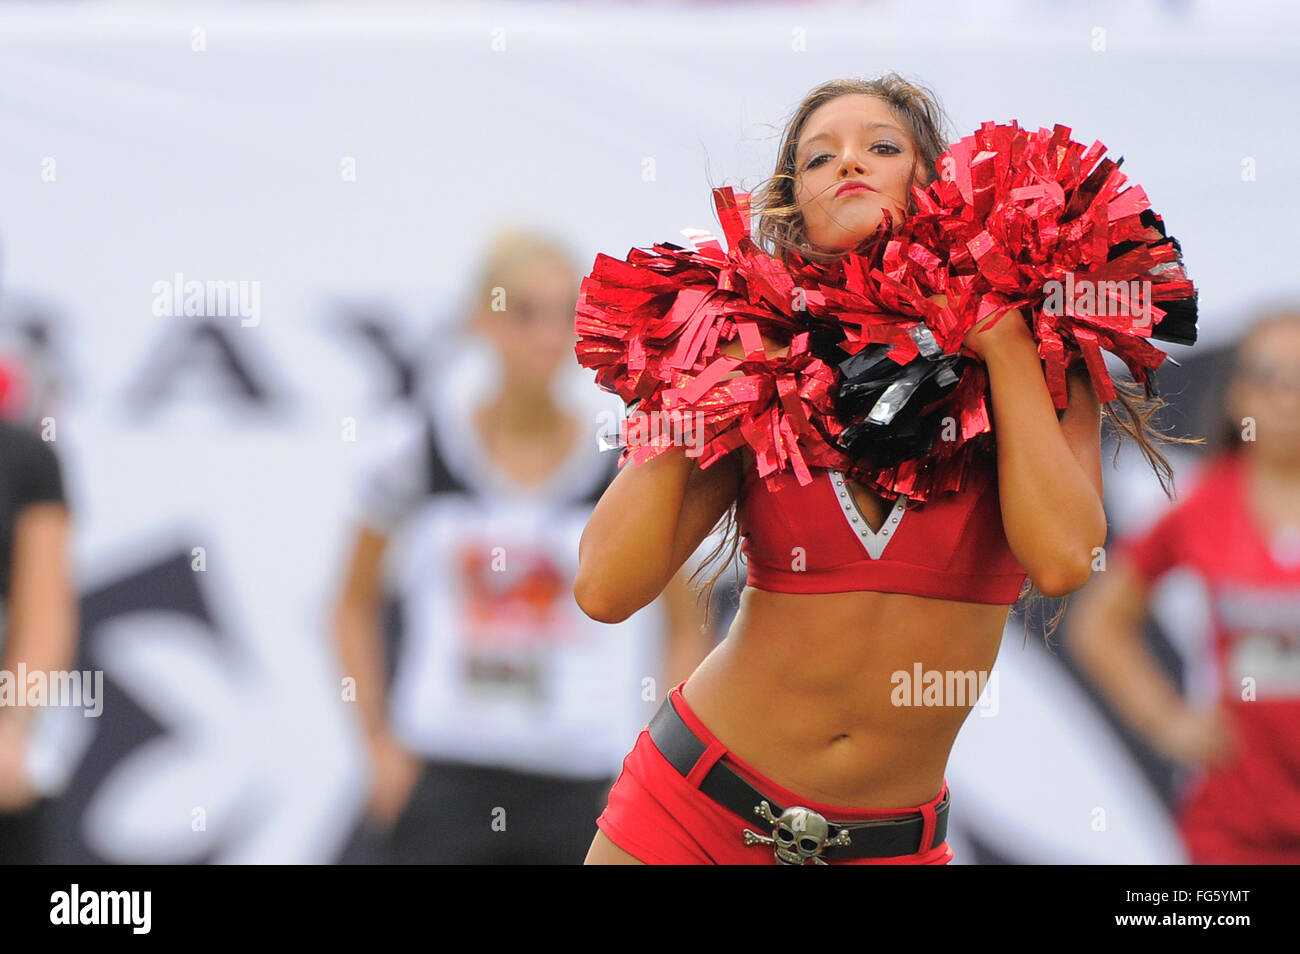 Tamap, Florida, USA. 9th Sep, 2012. Tampa Bay Buccaneers cheerleaders during the Bucs game against the Carolina Panthers at Raymond James Stadium on September 9, 2012 in Tampa, Florida. ZUMA Press/Scott A. Miller © Scott A. Miller/ZUMA Wire/Alamy Live News Stock Photo